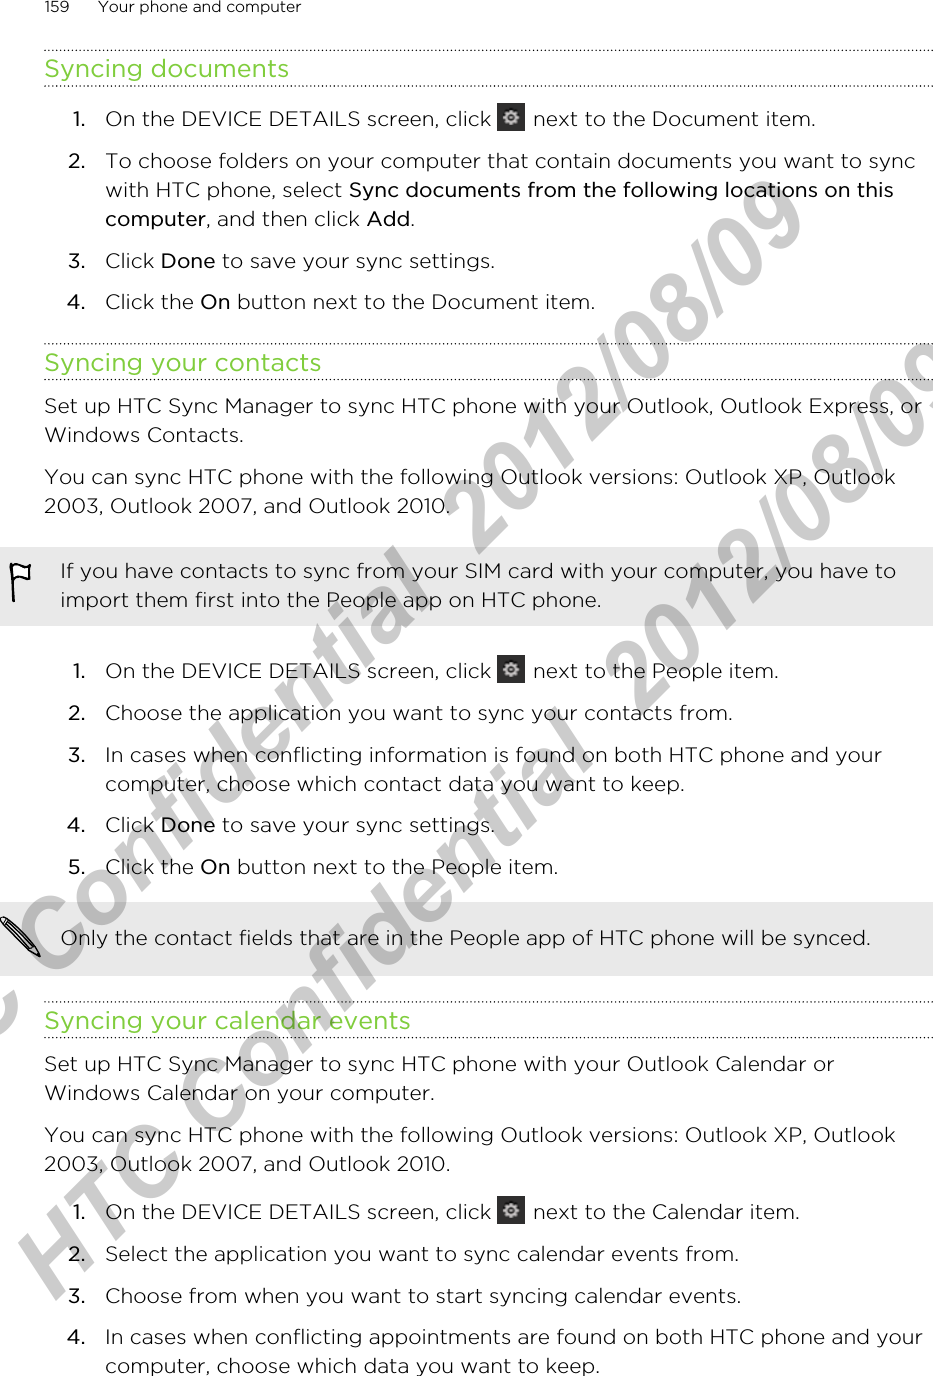 Syncing documents1. On the DEVICE DETAILS screen, click   next to the Document item.2. To choose folders on your computer that contain documents you want to syncwith HTC phone, select Sync documents from the following locations on thiscomputer, and then click Add.3. Click Done to save your sync settings.4. Click the On button next to the Document item.Syncing your contactsSet up HTC Sync Manager to sync HTC phone with your Outlook, Outlook Express, orWindows Contacts.You can sync HTC phone with the following Outlook versions: Outlook XP, Outlook2003, Outlook 2007, and Outlook 2010.If you have contacts to sync from your SIM card with your computer, you have toimport them first into the People app on HTC phone.1. On the DEVICE DETAILS screen, click   next to the People item.2. Choose the application you want to sync your contacts from.3. In cases when conflicting information is found on both HTC phone and yourcomputer, choose which contact data you want to keep.4. Click Done to save your sync settings.5. Click the On button next to the People item.Only the contact fields that are in the People app of HTC phone will be synced.Syncing your calendar eventsSet up HTC Sync Manager to sync HTC phone with your Outlook Calendar orWindows Calendar on your computer.You can sync HTC phone with the following Outlook versions: Outlook XP, Outlook2003, Outlook 2007, and Outlook 2010.1. On the DEVICE DETAILS screen, click   next to the Calendar item.2. Select the application you want to sync calendar events from.3. Choose from when you want to start syncing calendar events.4. In cases when conflicting appointments are found on both HTC phone and yourcomputer, choose which data you want to keep.159 Your phone and computerHTC Confidential  2012/08/09  HTC Confidential  2012/08/09 